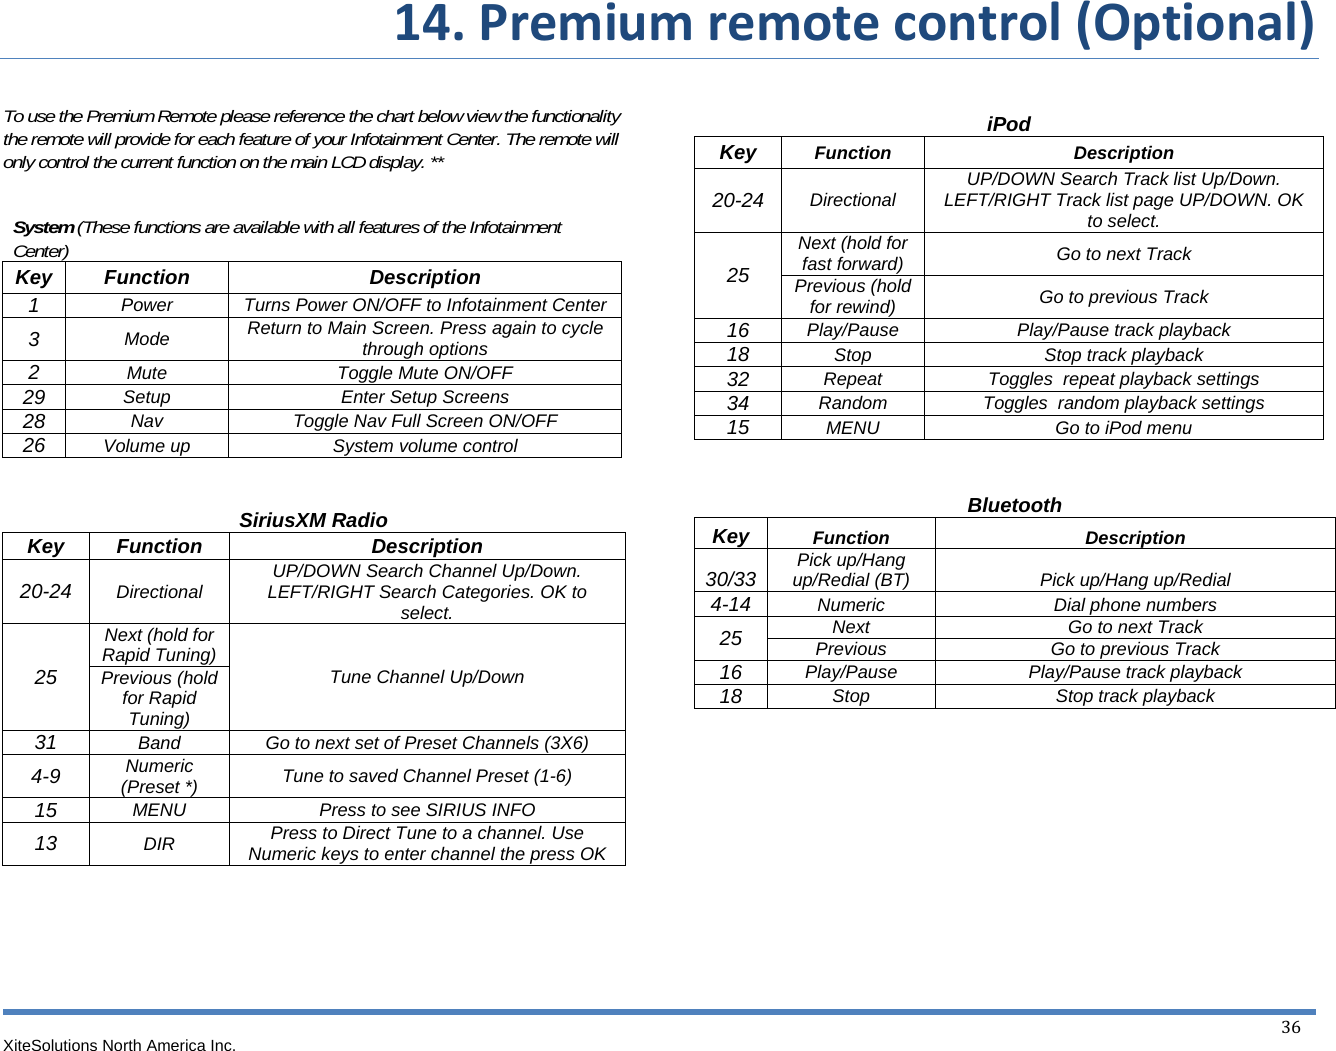  14.Premiumremotecontrol(Optional)XiteSolutions North America Inc.  36  To use the Premium Remote please reference the chart below view the functionality the remote will provide for each feature of your Infotainment Center. The remote will only control the current function on the main LCD display. **   System (These functions are available with all features of the Infotainment Center) Key Function Description 1  Power  Turns Power ON/OFF to Infotainment Center3  Mode  Return to Main Screen. Press again to cycle through options 2  Mute Toggle Mute ON/OFF 29  Setup  Enter Setup Screens 28  Nav  Toggle Nav Full Screen ON/OFF 26  Volume up  System volume control   SiriusXM Radio Key Function  Description 20-24 Directional  UP/DOWN Search Channel Up/Down. LEFT/RIGHT Search Categories. OK to select. 25 Next (hold for Rapid Tuning)  Tune Channel Up/Down Previous (hold for Rapid Tuning) 31  Band  Go to next set of Preset Channels (3X6) 4-9  Numeric  (Preset *)  Tune to saved Channel Preset (1-6) 15  MENU  Press to see SIRIUS INFO 13  DIR  Press to Direct Tune to a channel. Use Numeric keys to enter channel the press OK        iPod Key  Function Description 20-24  Directional  UP/DOWN Search Track list Up/Down. LEFT/RIGHT Track list page UP/DOWN. OK to select. 25 Next (hold for fast forward)  Go to next Track Previous (hold for rewind)  Go to previous Track 16  Play/Pause  Play/Pause track playback 18  Stop  Stop track playback 32  Repeat  Toggles  repeat playback settings 34  Random  Toggles  random playback settings 15  MENU  Go to iPod menu   Bluetooth Key  Function Description 30/33  Pick up/Hang up/Redial (BT)  Pick up/Hang up/Redial 4-14  Numeric  Dial phone numbers 25  Next  Go to next Track Previous Go to previous Track 16  Play/Pause  Play/Pause track playback 18  Stop  Stop track playback   